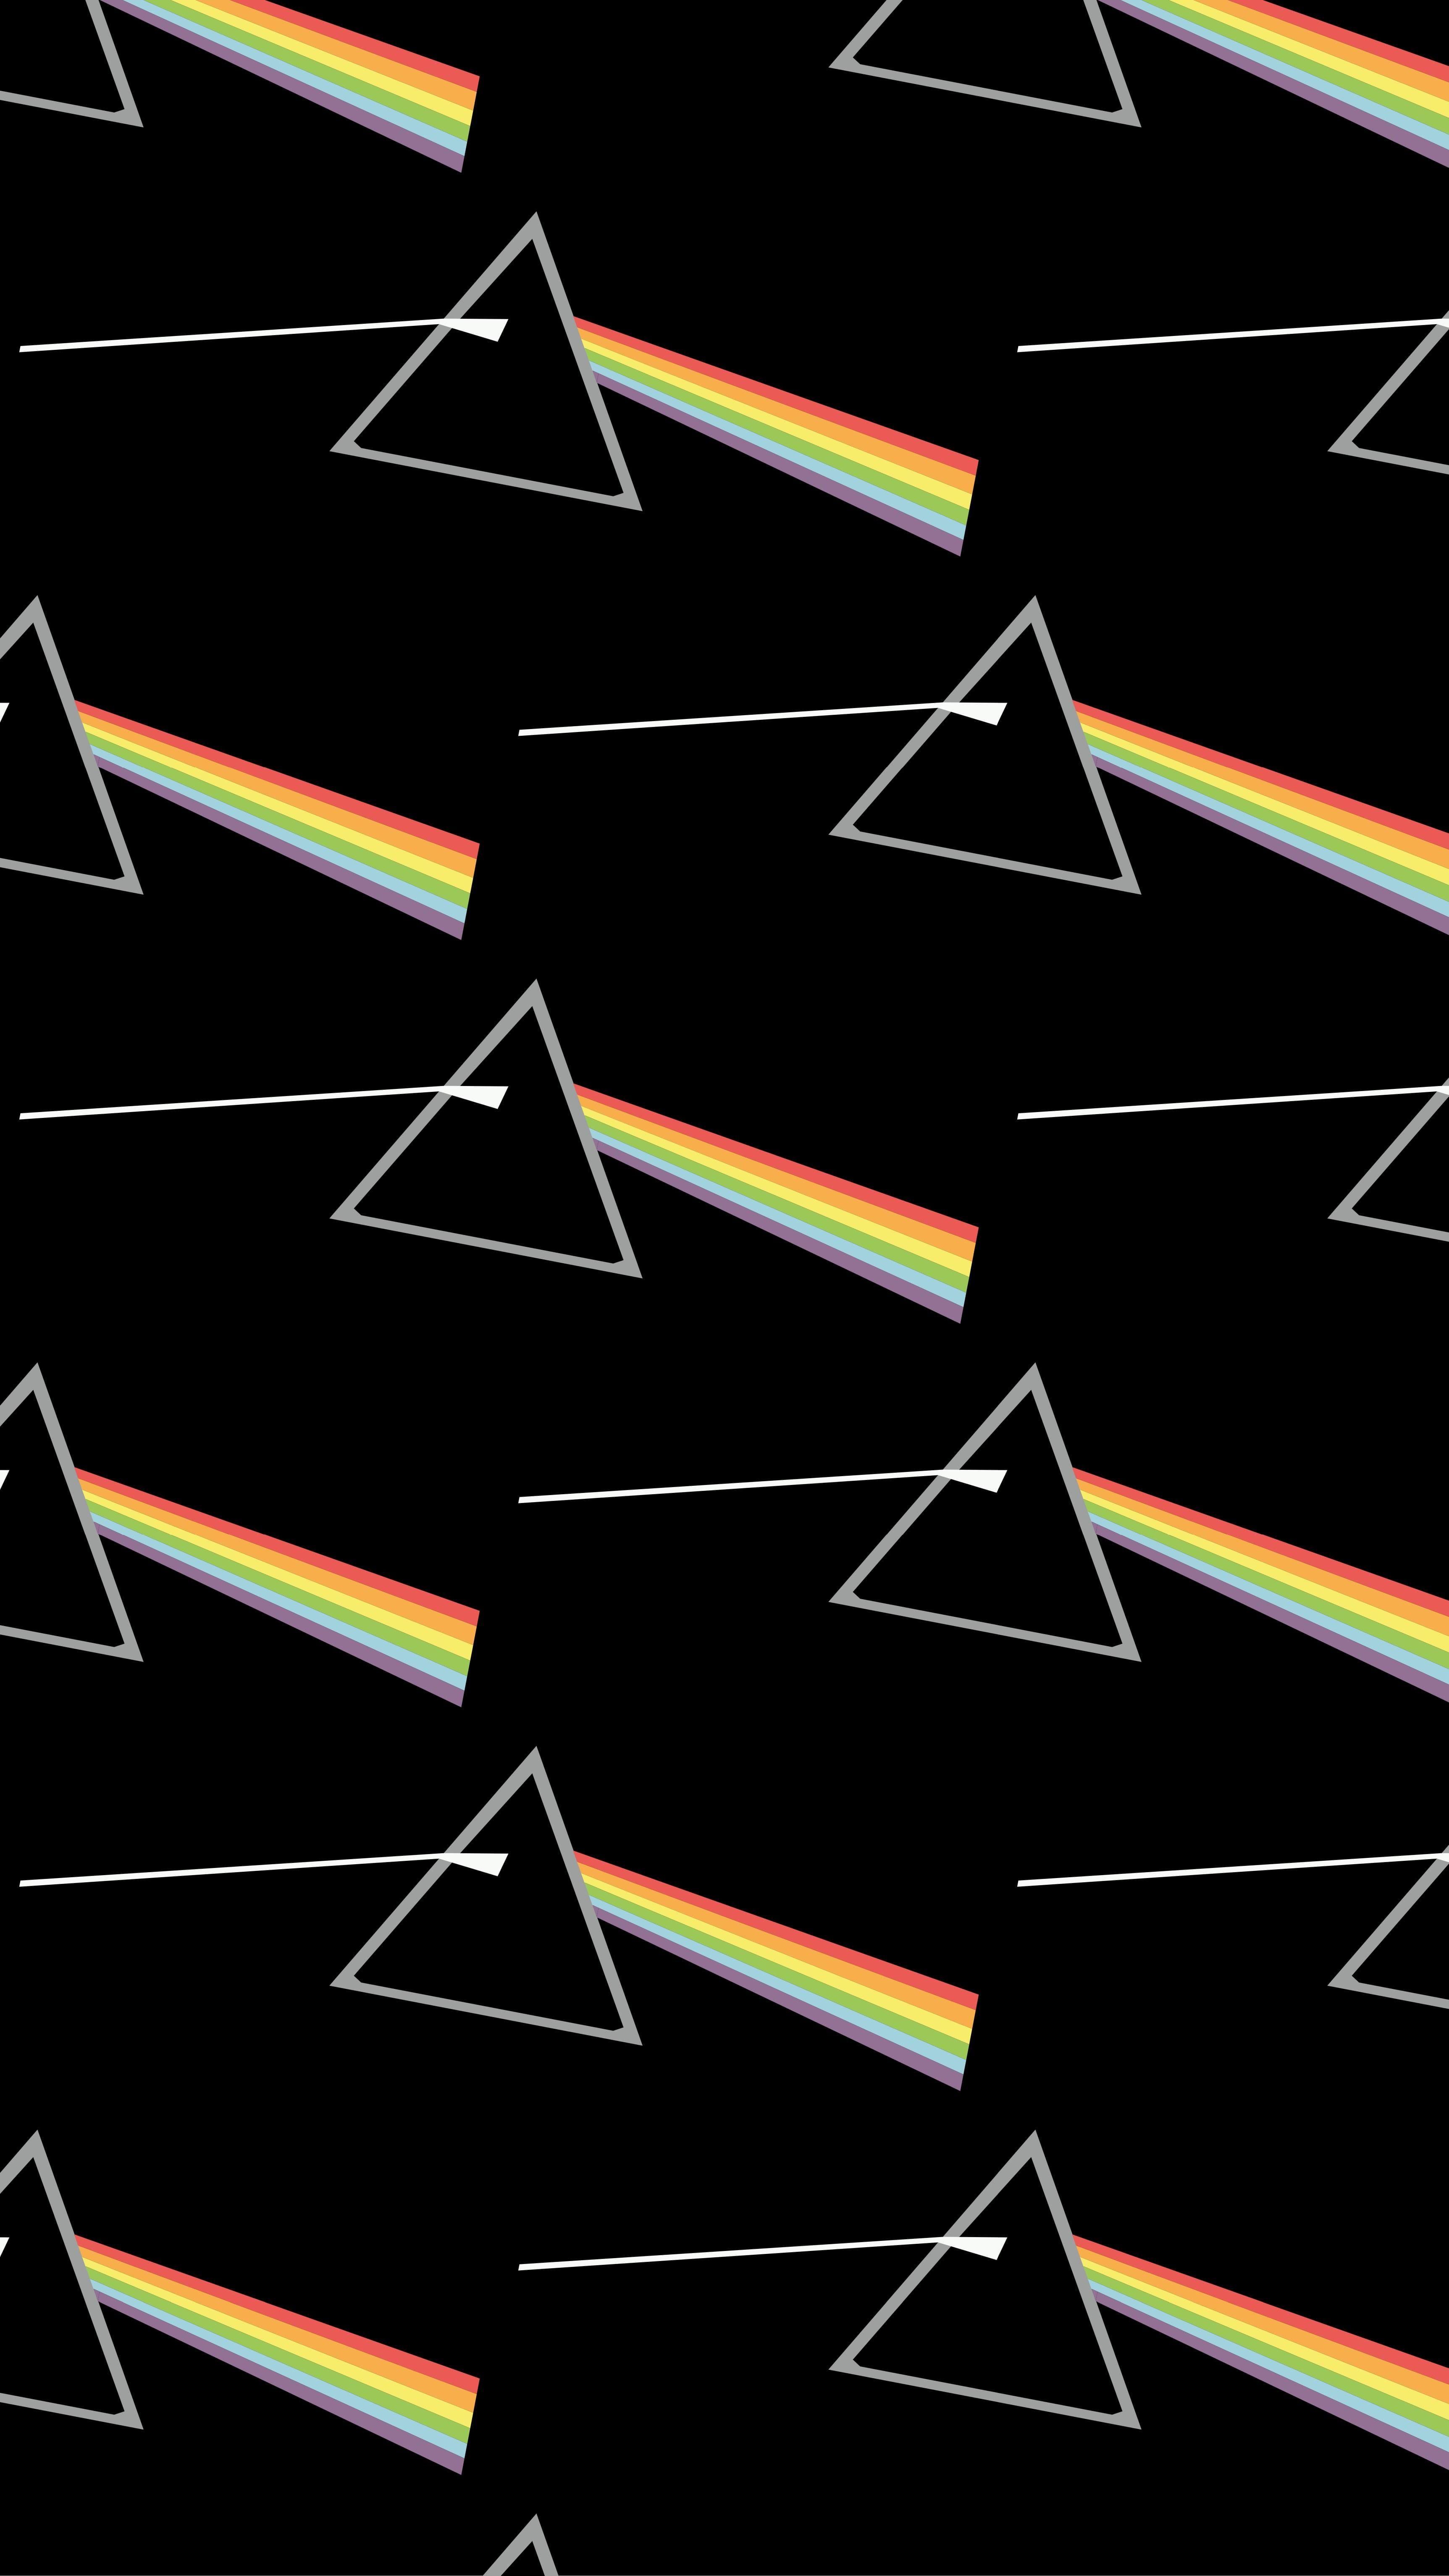 Heres a Pink Floyd Wallpaper for Mobile .com